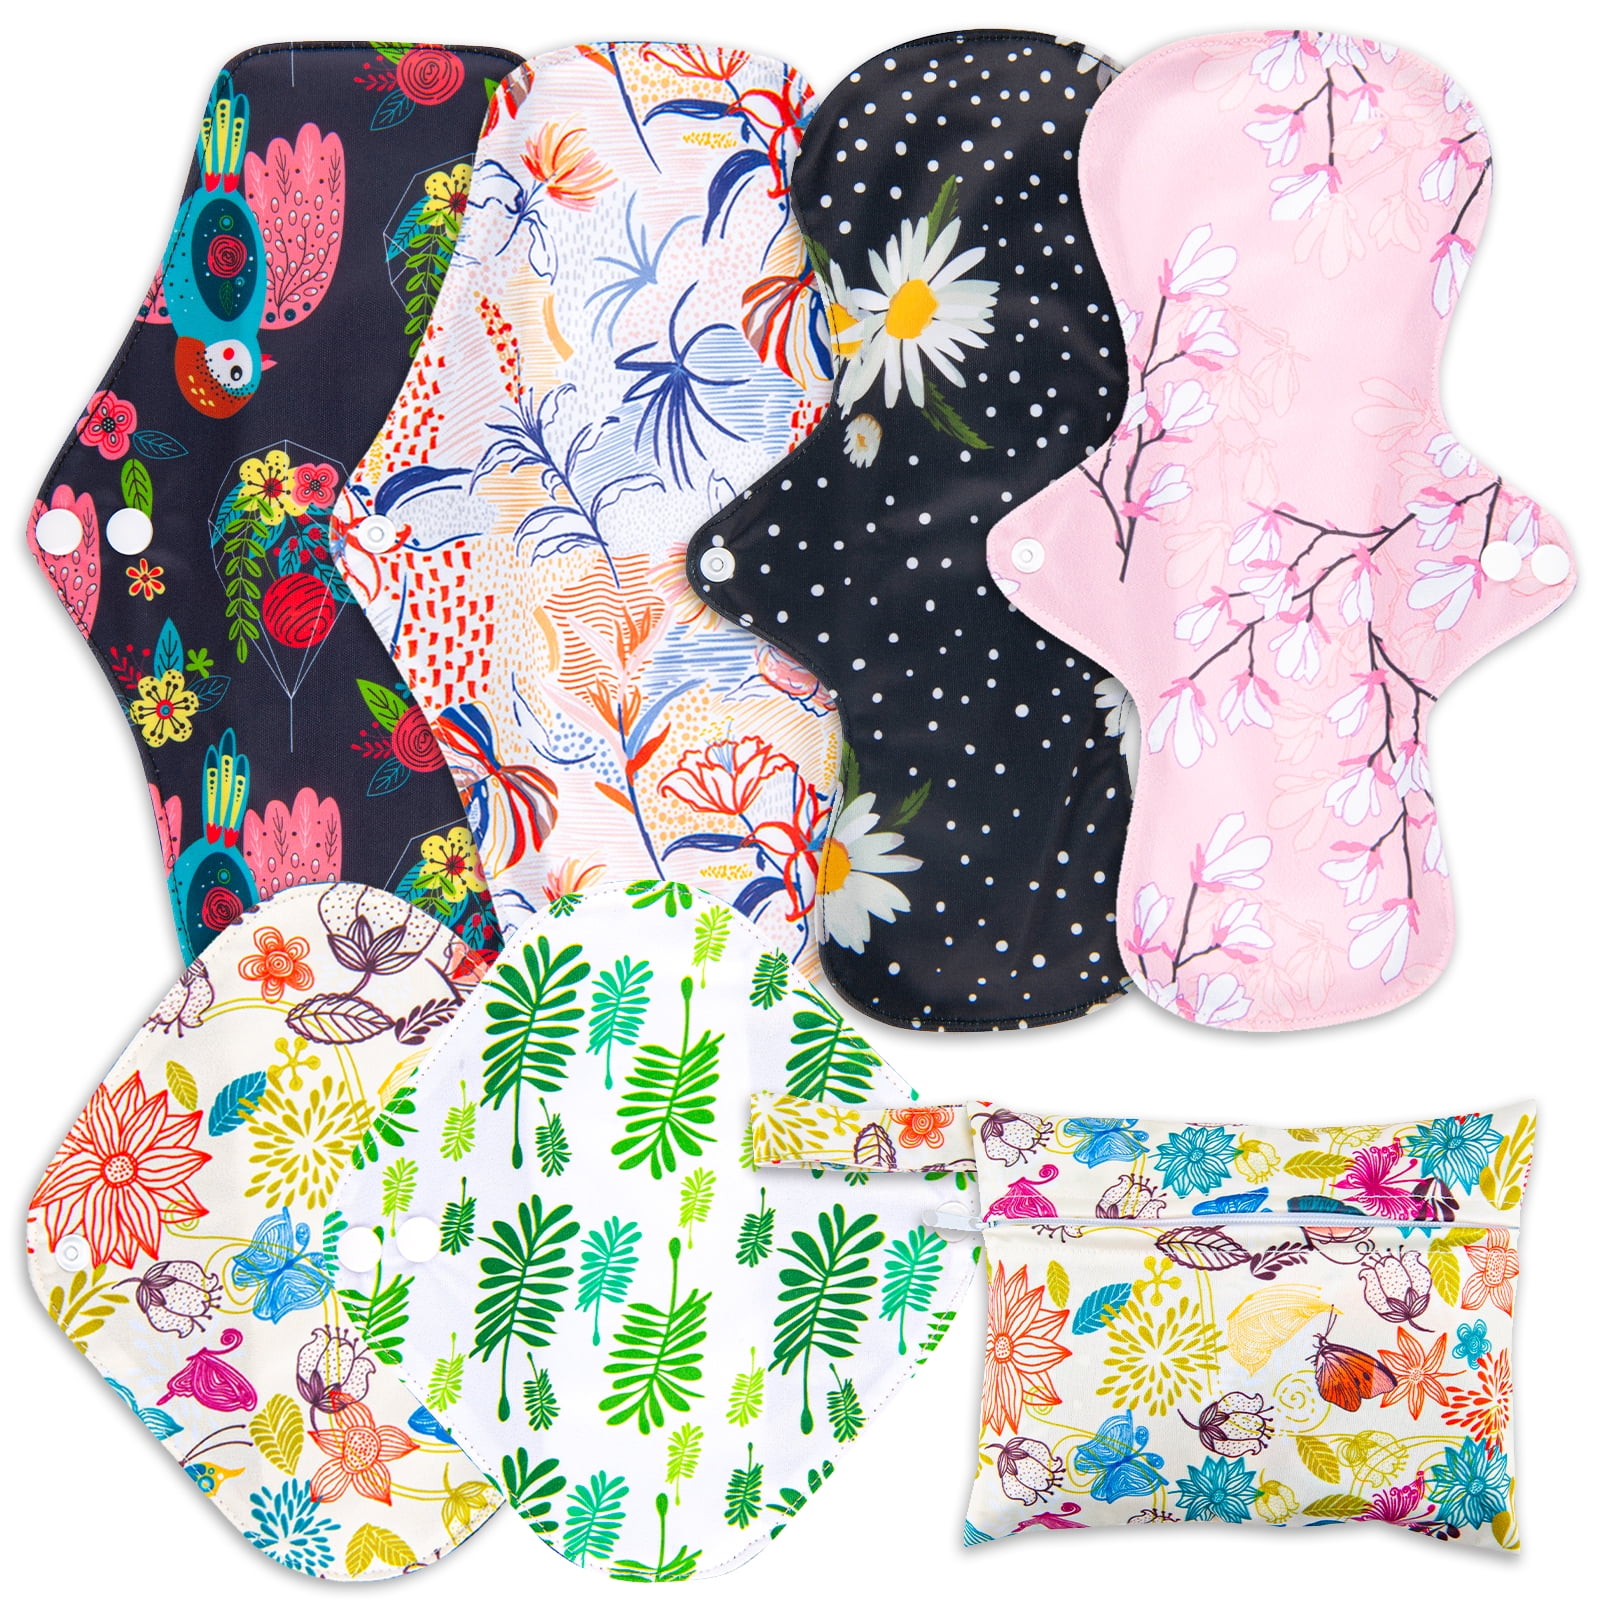 Nyidpsz 7in1 Reusable Menstrual Pads Large Sanitary Pads Set with Wings  Waterproof Washable Sanitary Menstrual Cloth Pads Panty Liners for Women